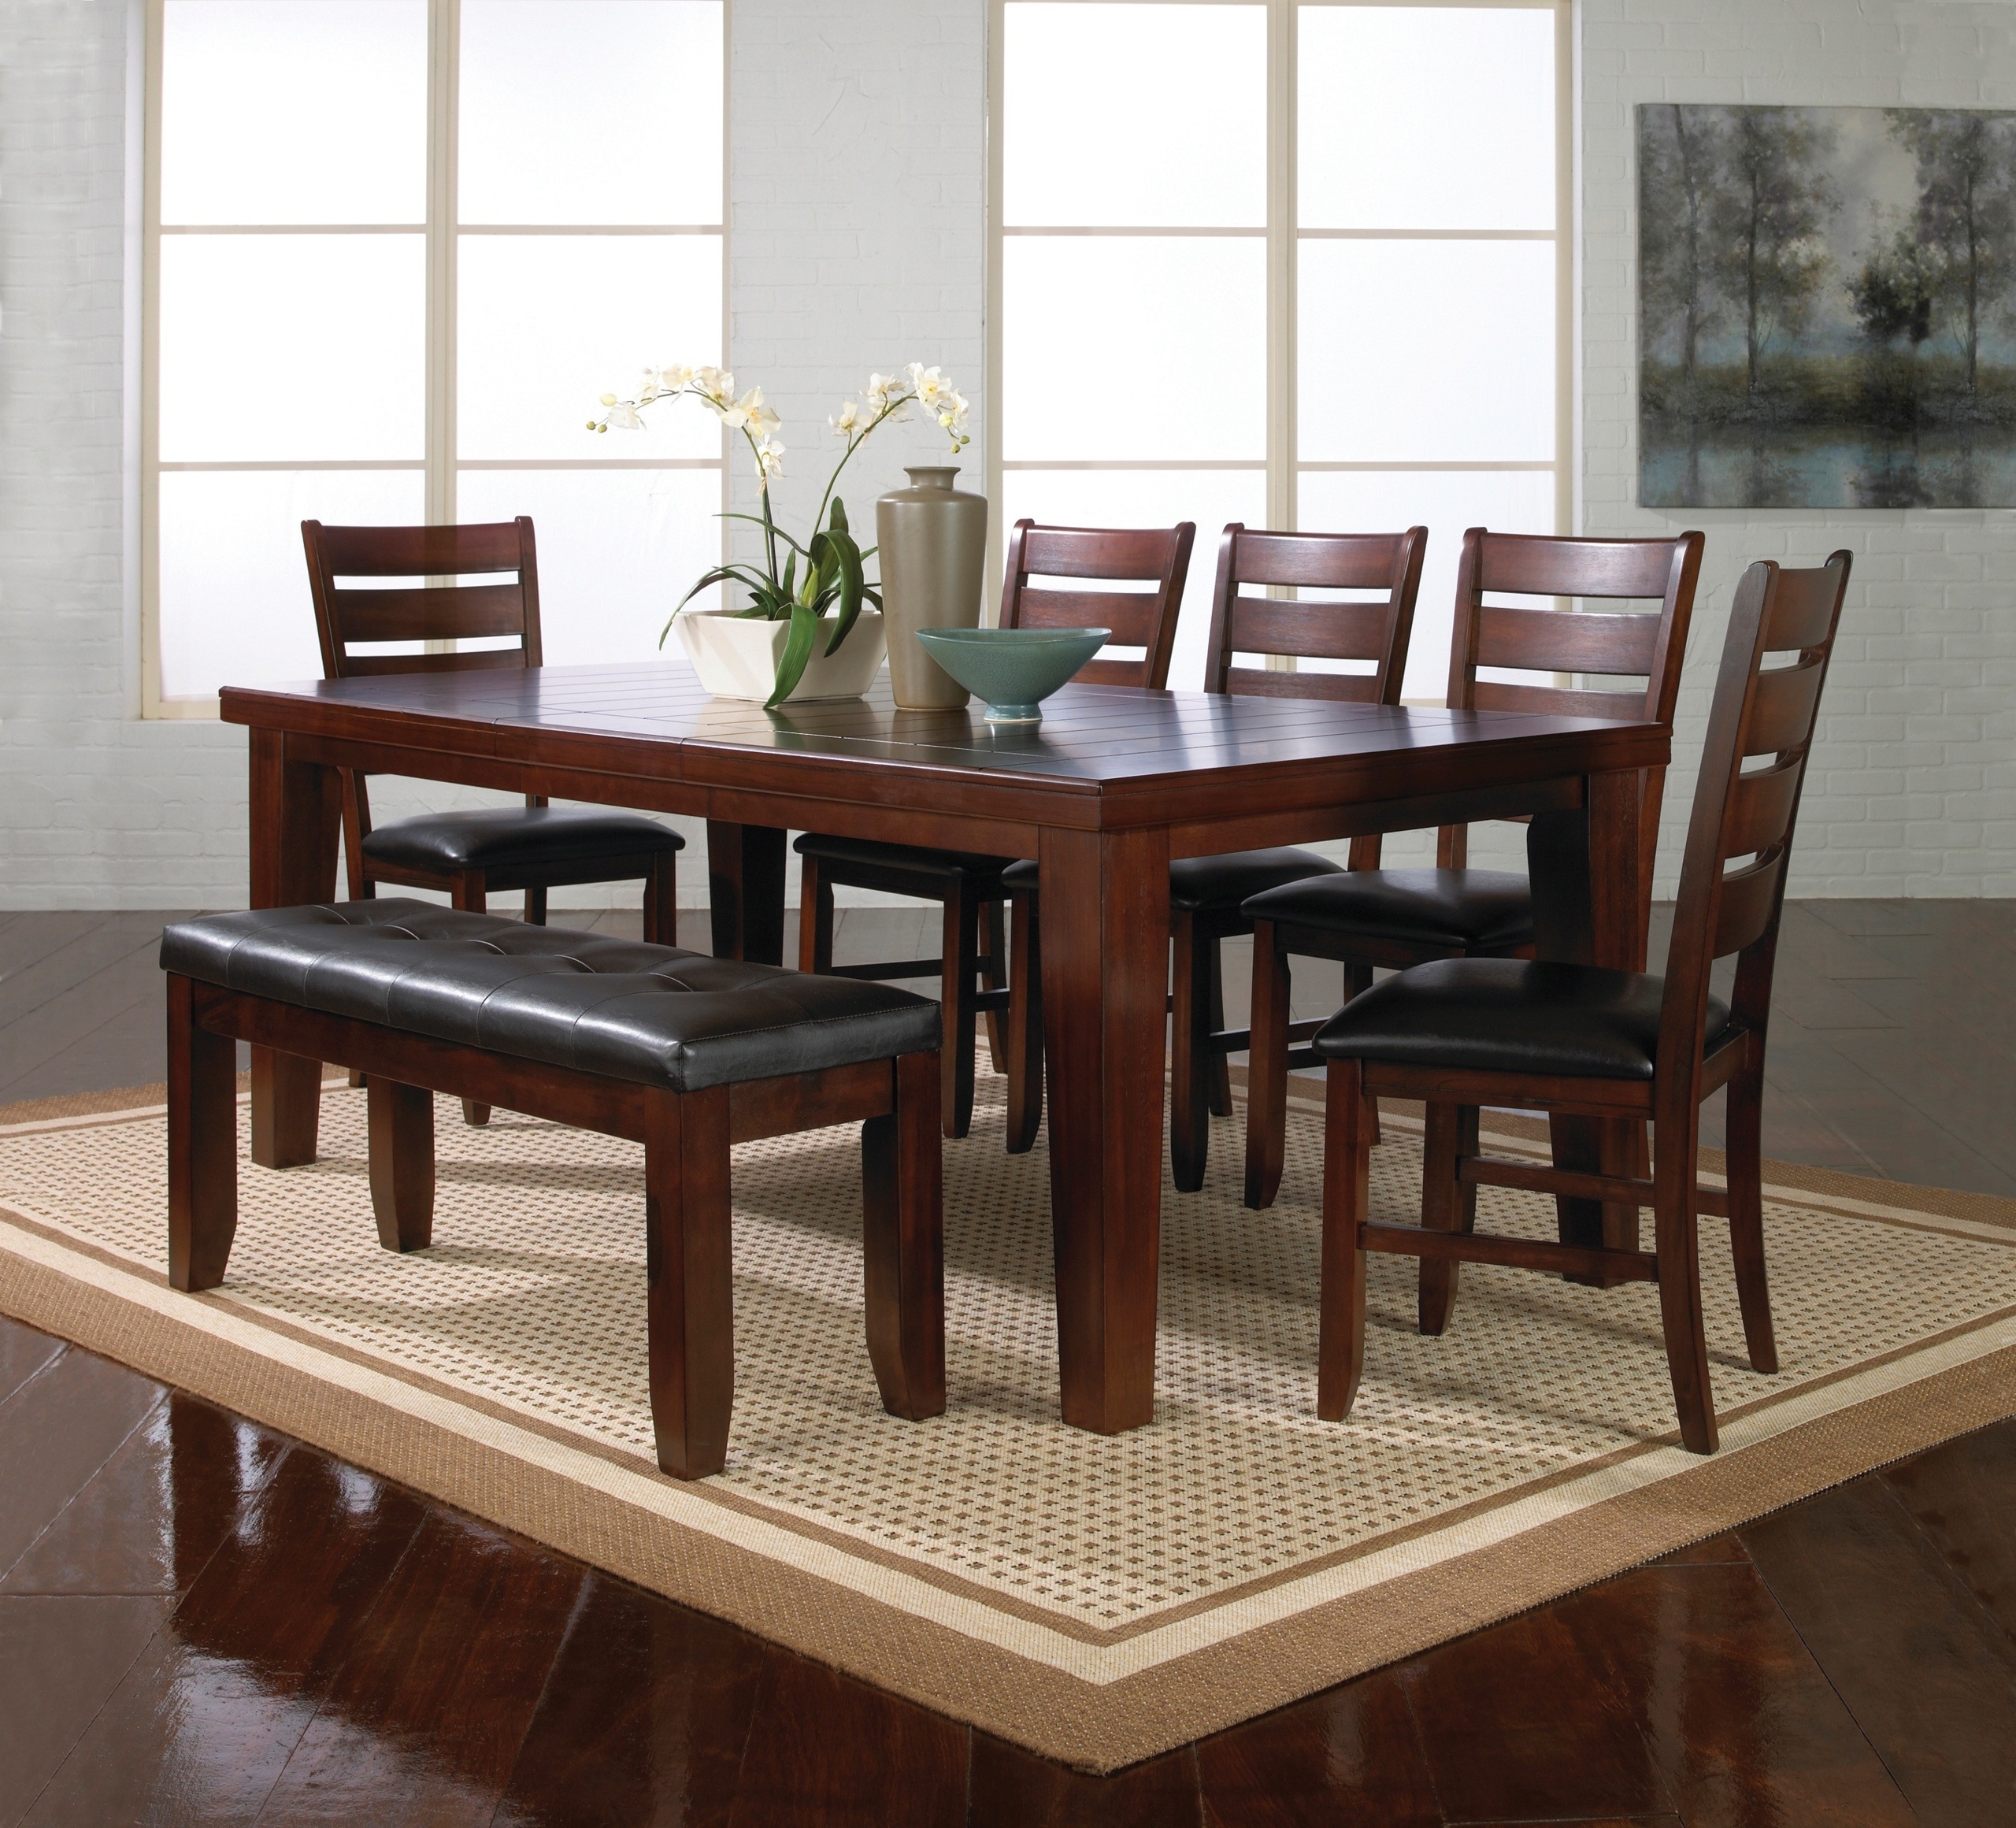 Dining Table With Bench Visualhunt, Wooden Dining Table And Chairs Ideas